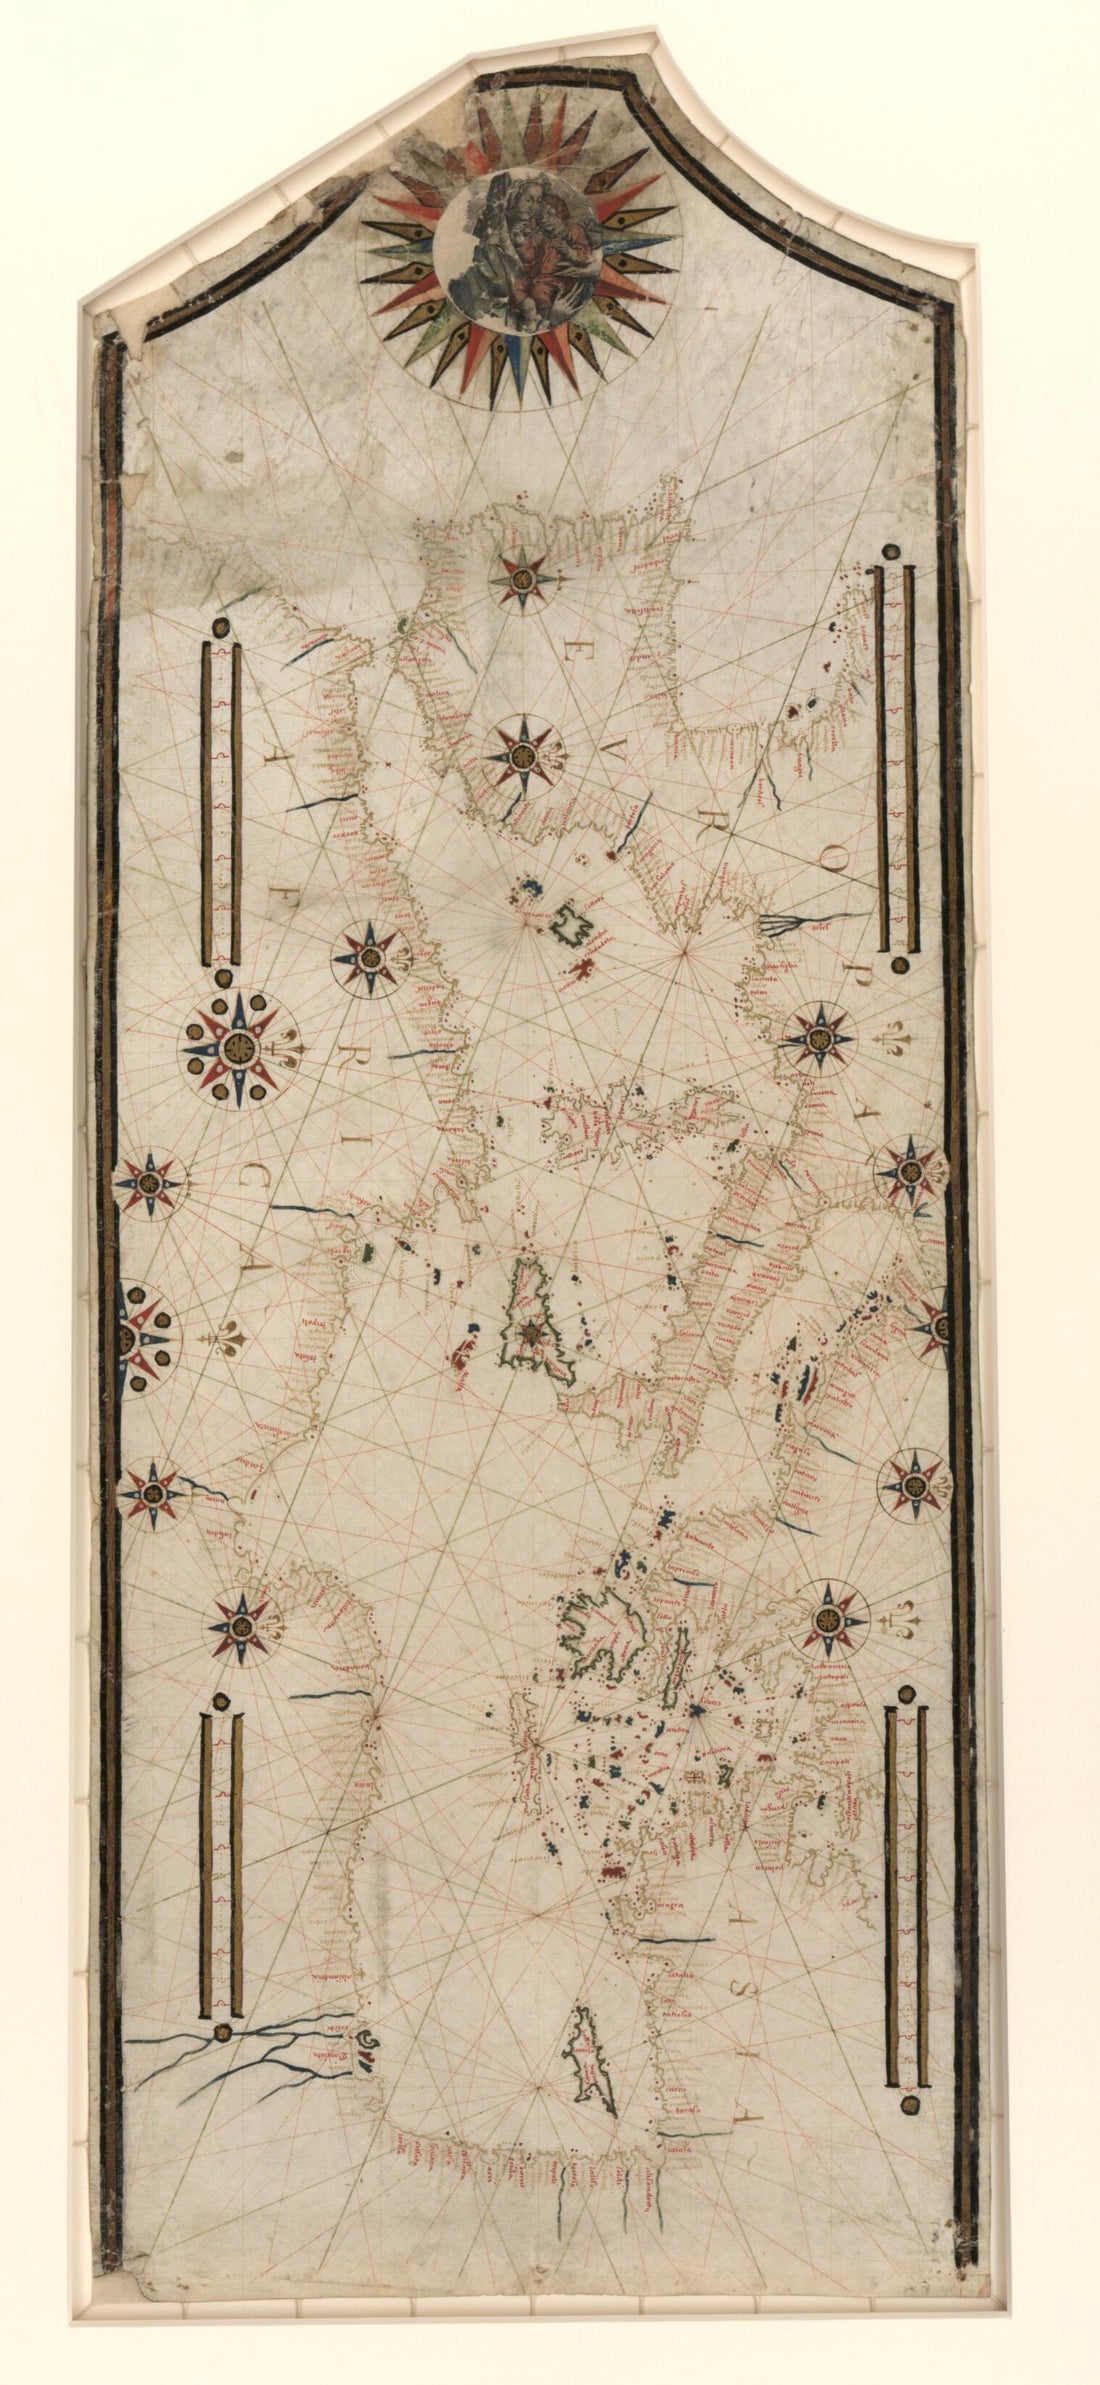 This old map of Portolan Chart of the Mediterranean and Connecting Seas from 1550 was created by  in 1550